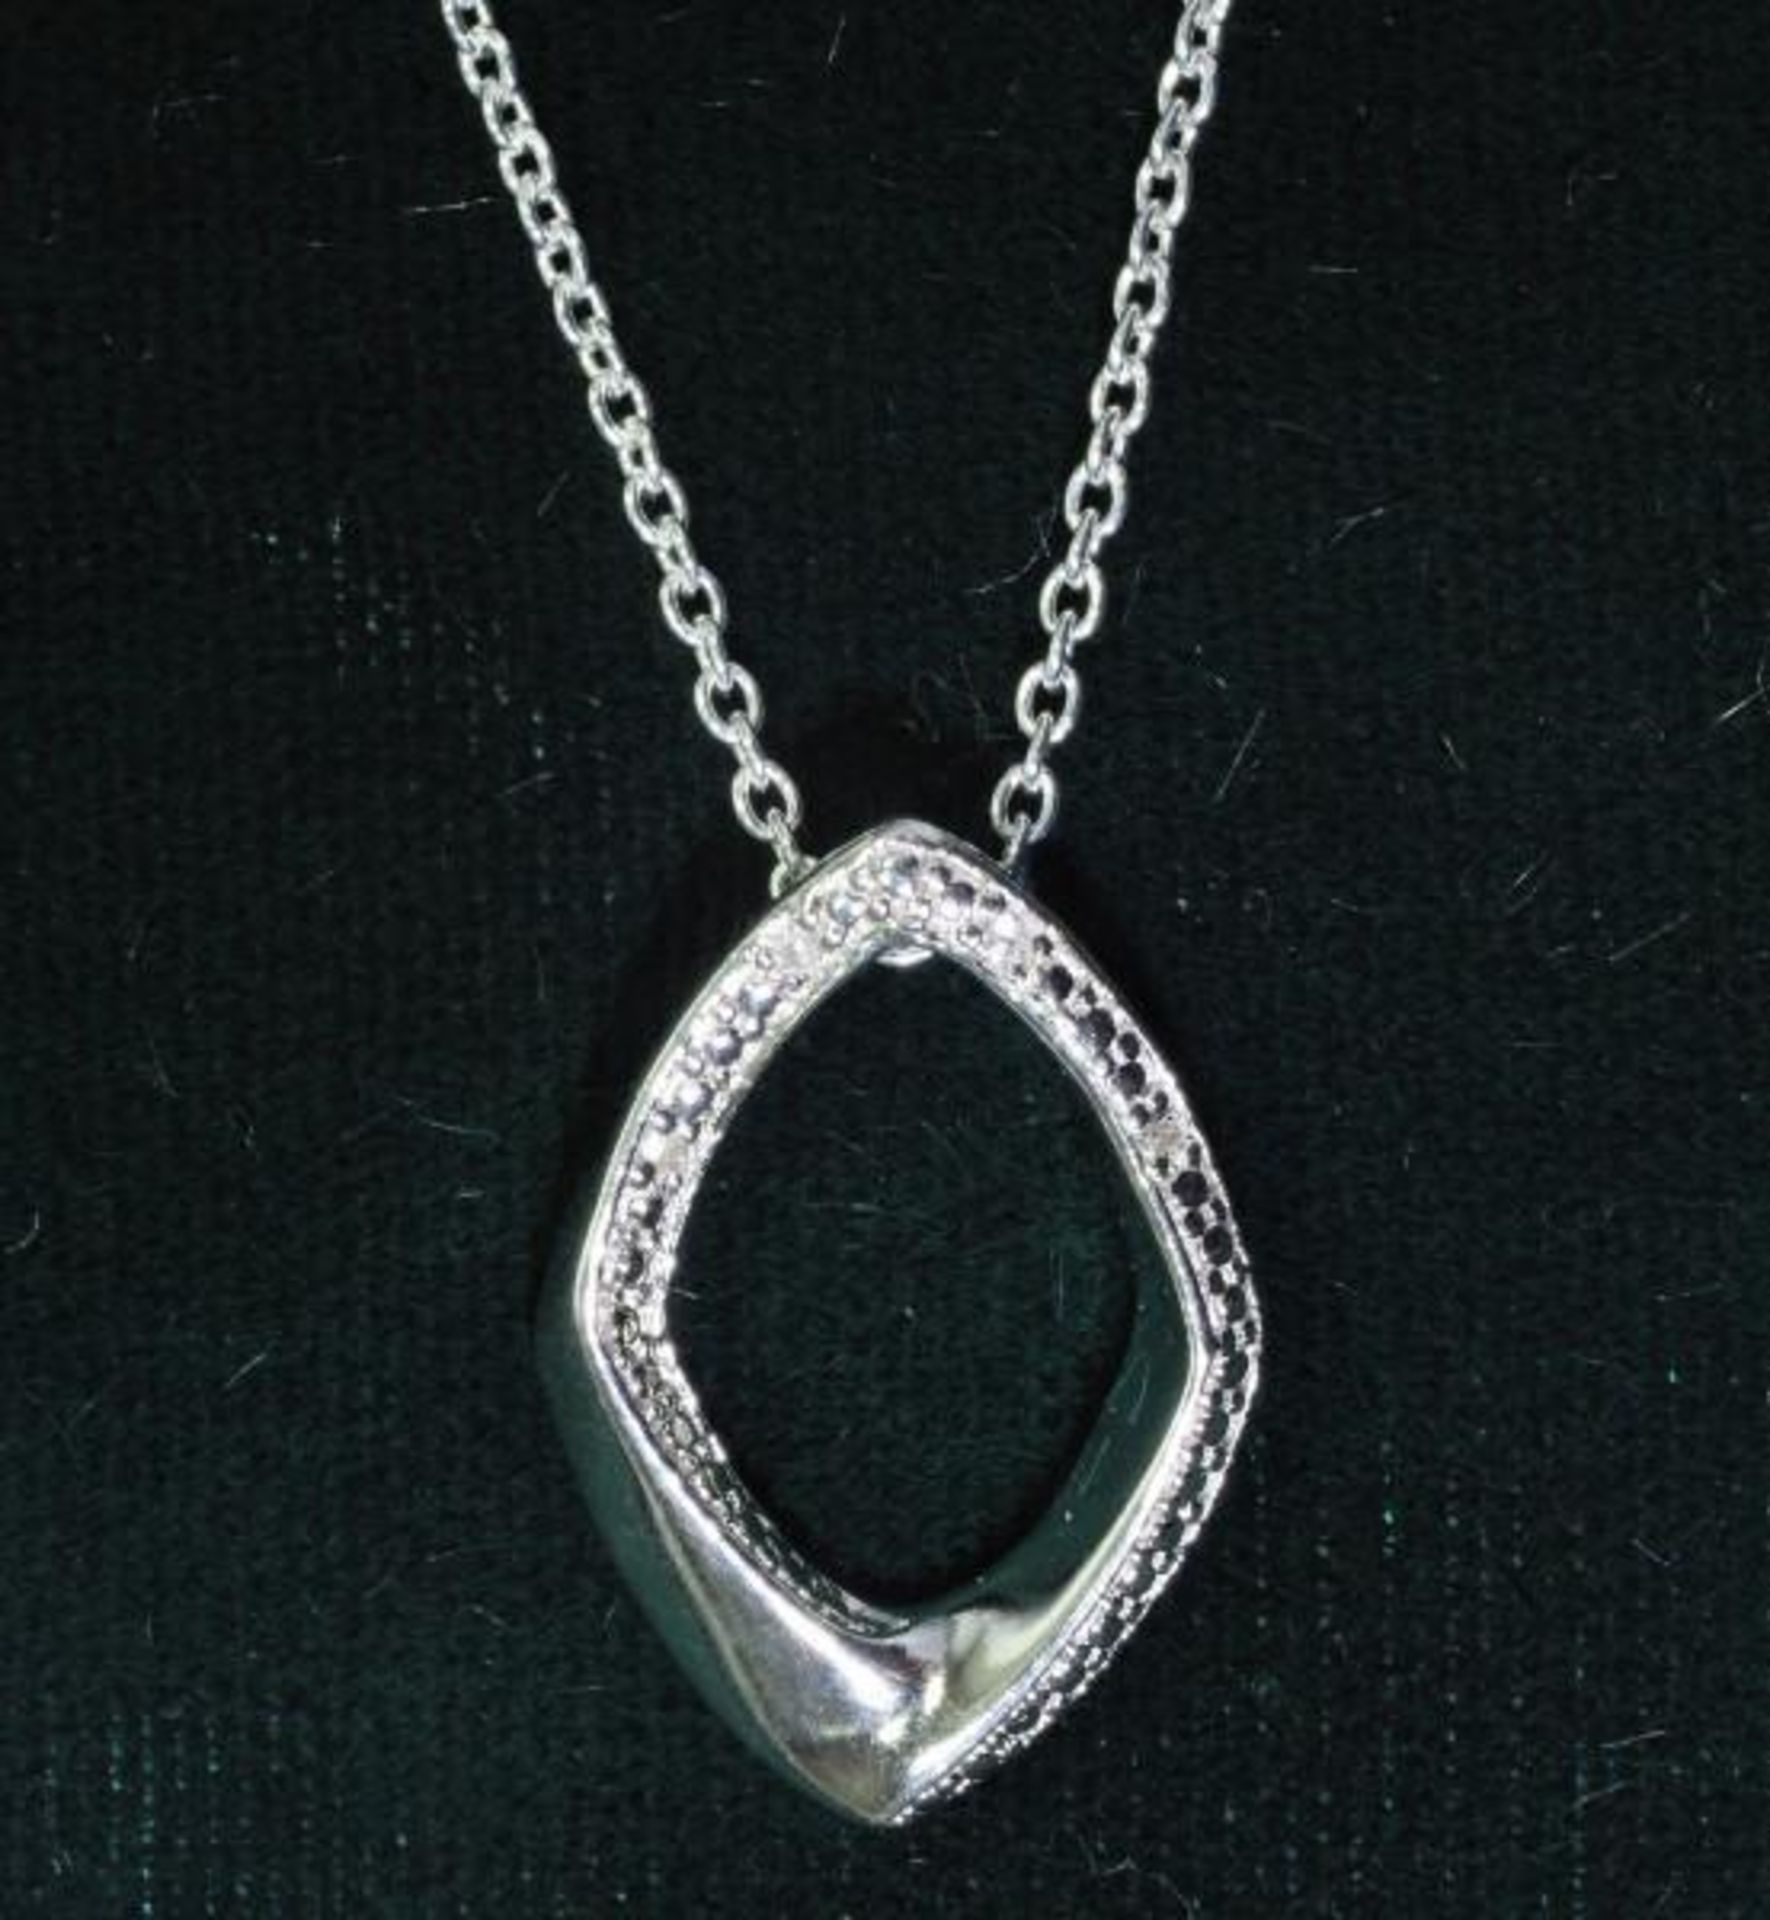 S. Silver Diamond Pendant with Chain. Retail $120 (MS07 - 16)